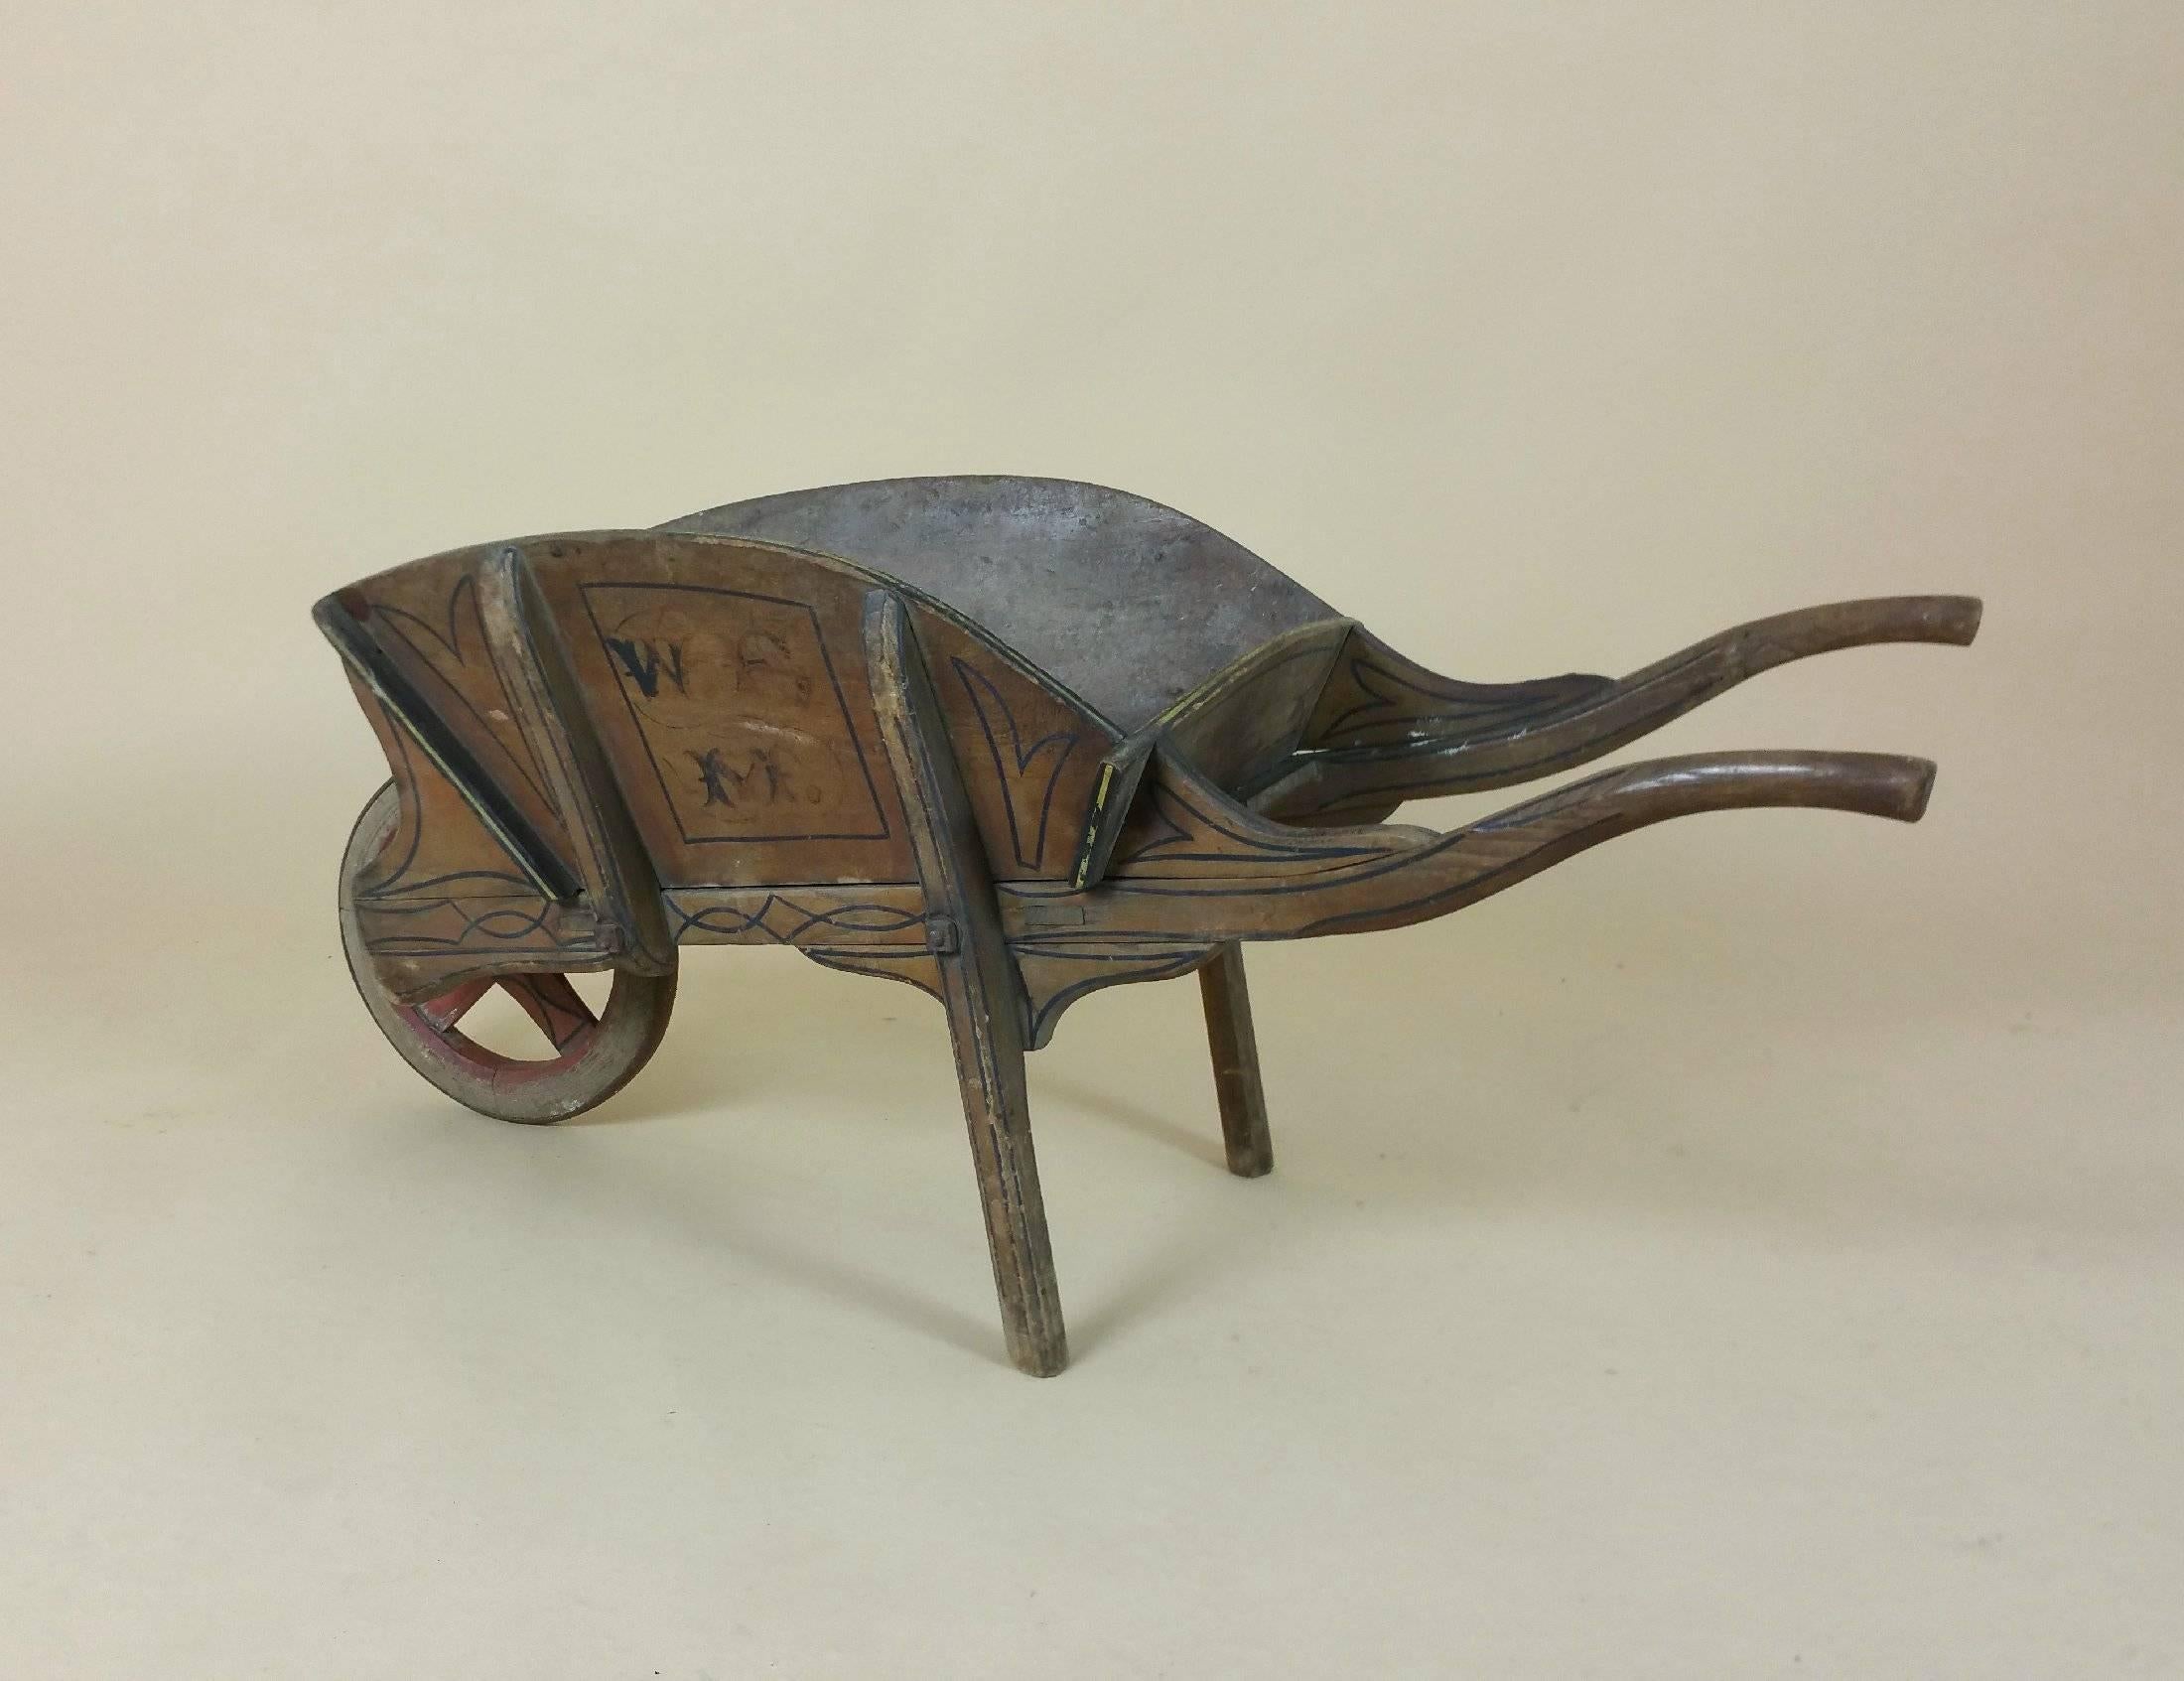 This absolutely enchanting and very rare early 19th century library book barrow is made of fruitwood that has been hand-painted and decorated with a monogram. The book barrow has a wonderful patina, worn and weathered, with a working front wheel. It